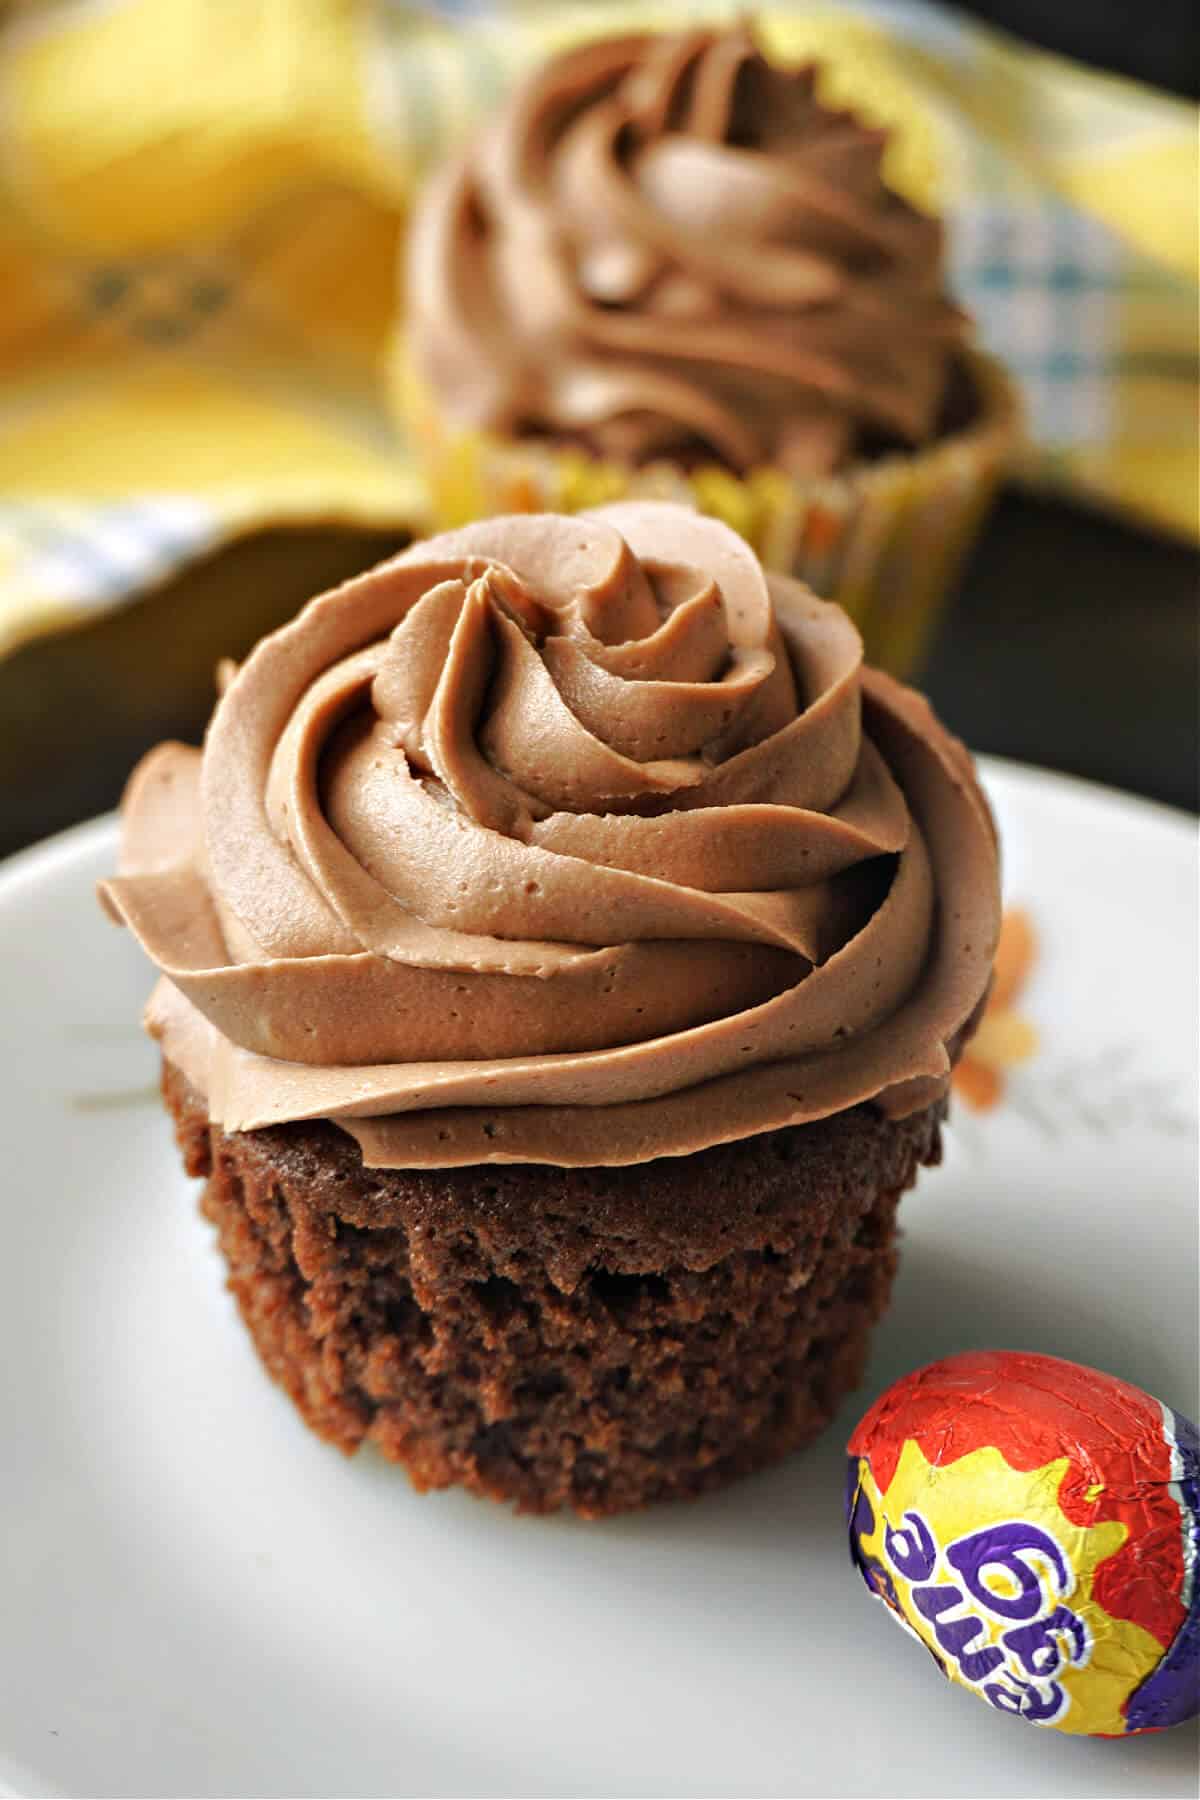 A chocolate cupcake on a white plate with a mini creme egg on the side.